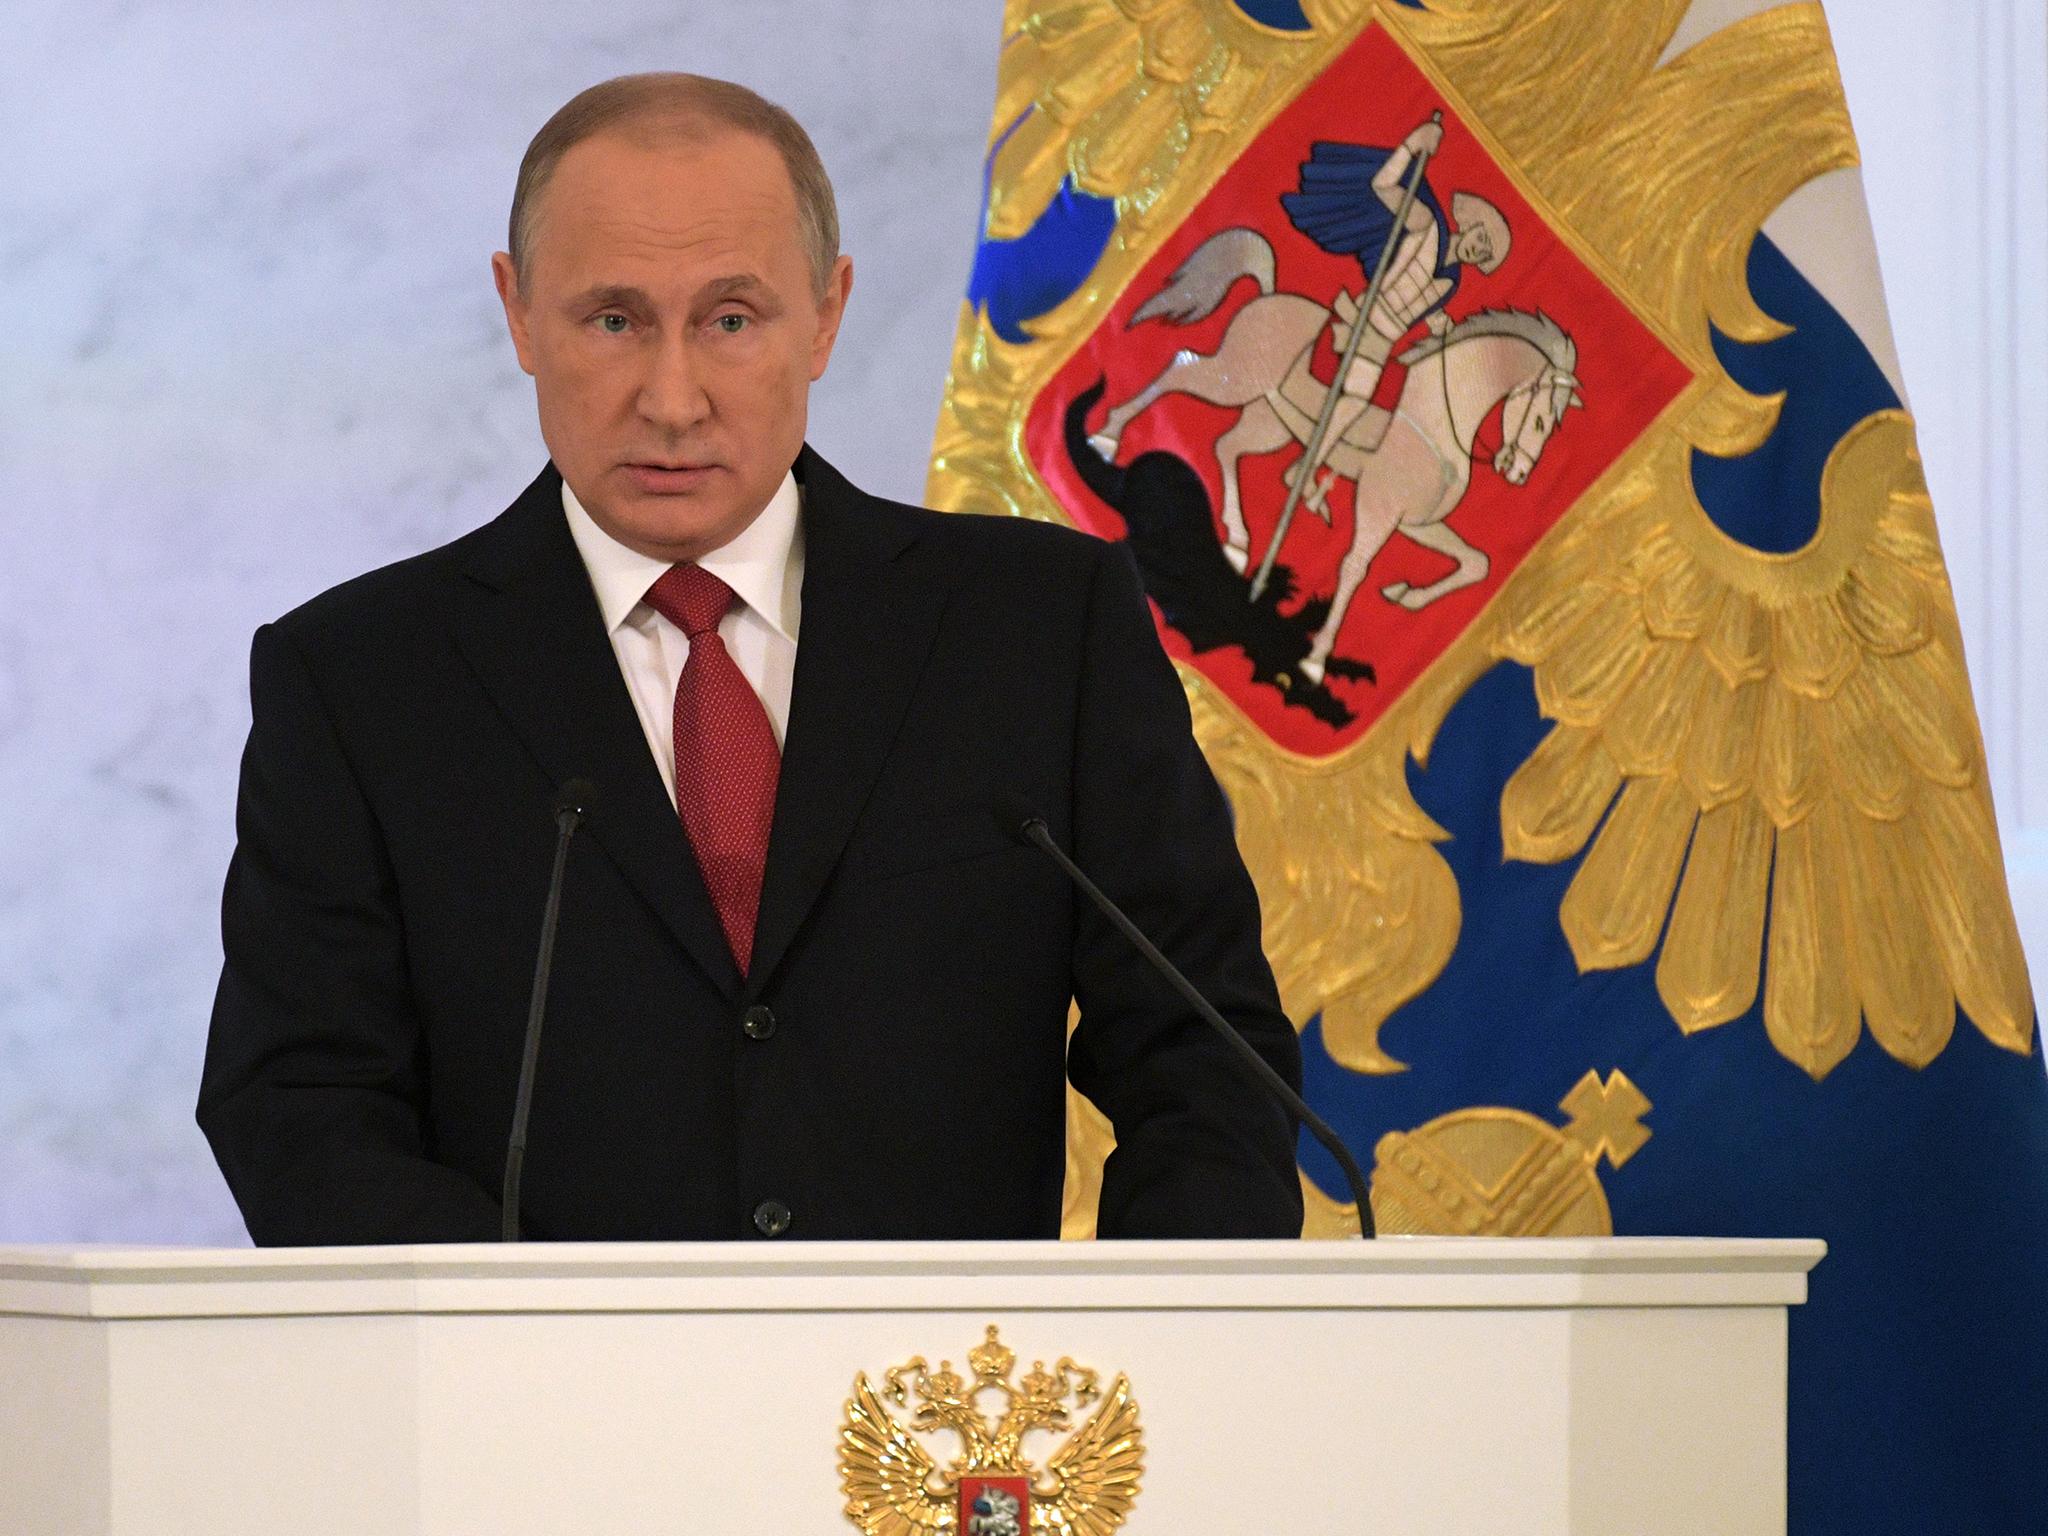 News of test comes amid growing tensions between the West and the Kremlin under Vladimir Putin